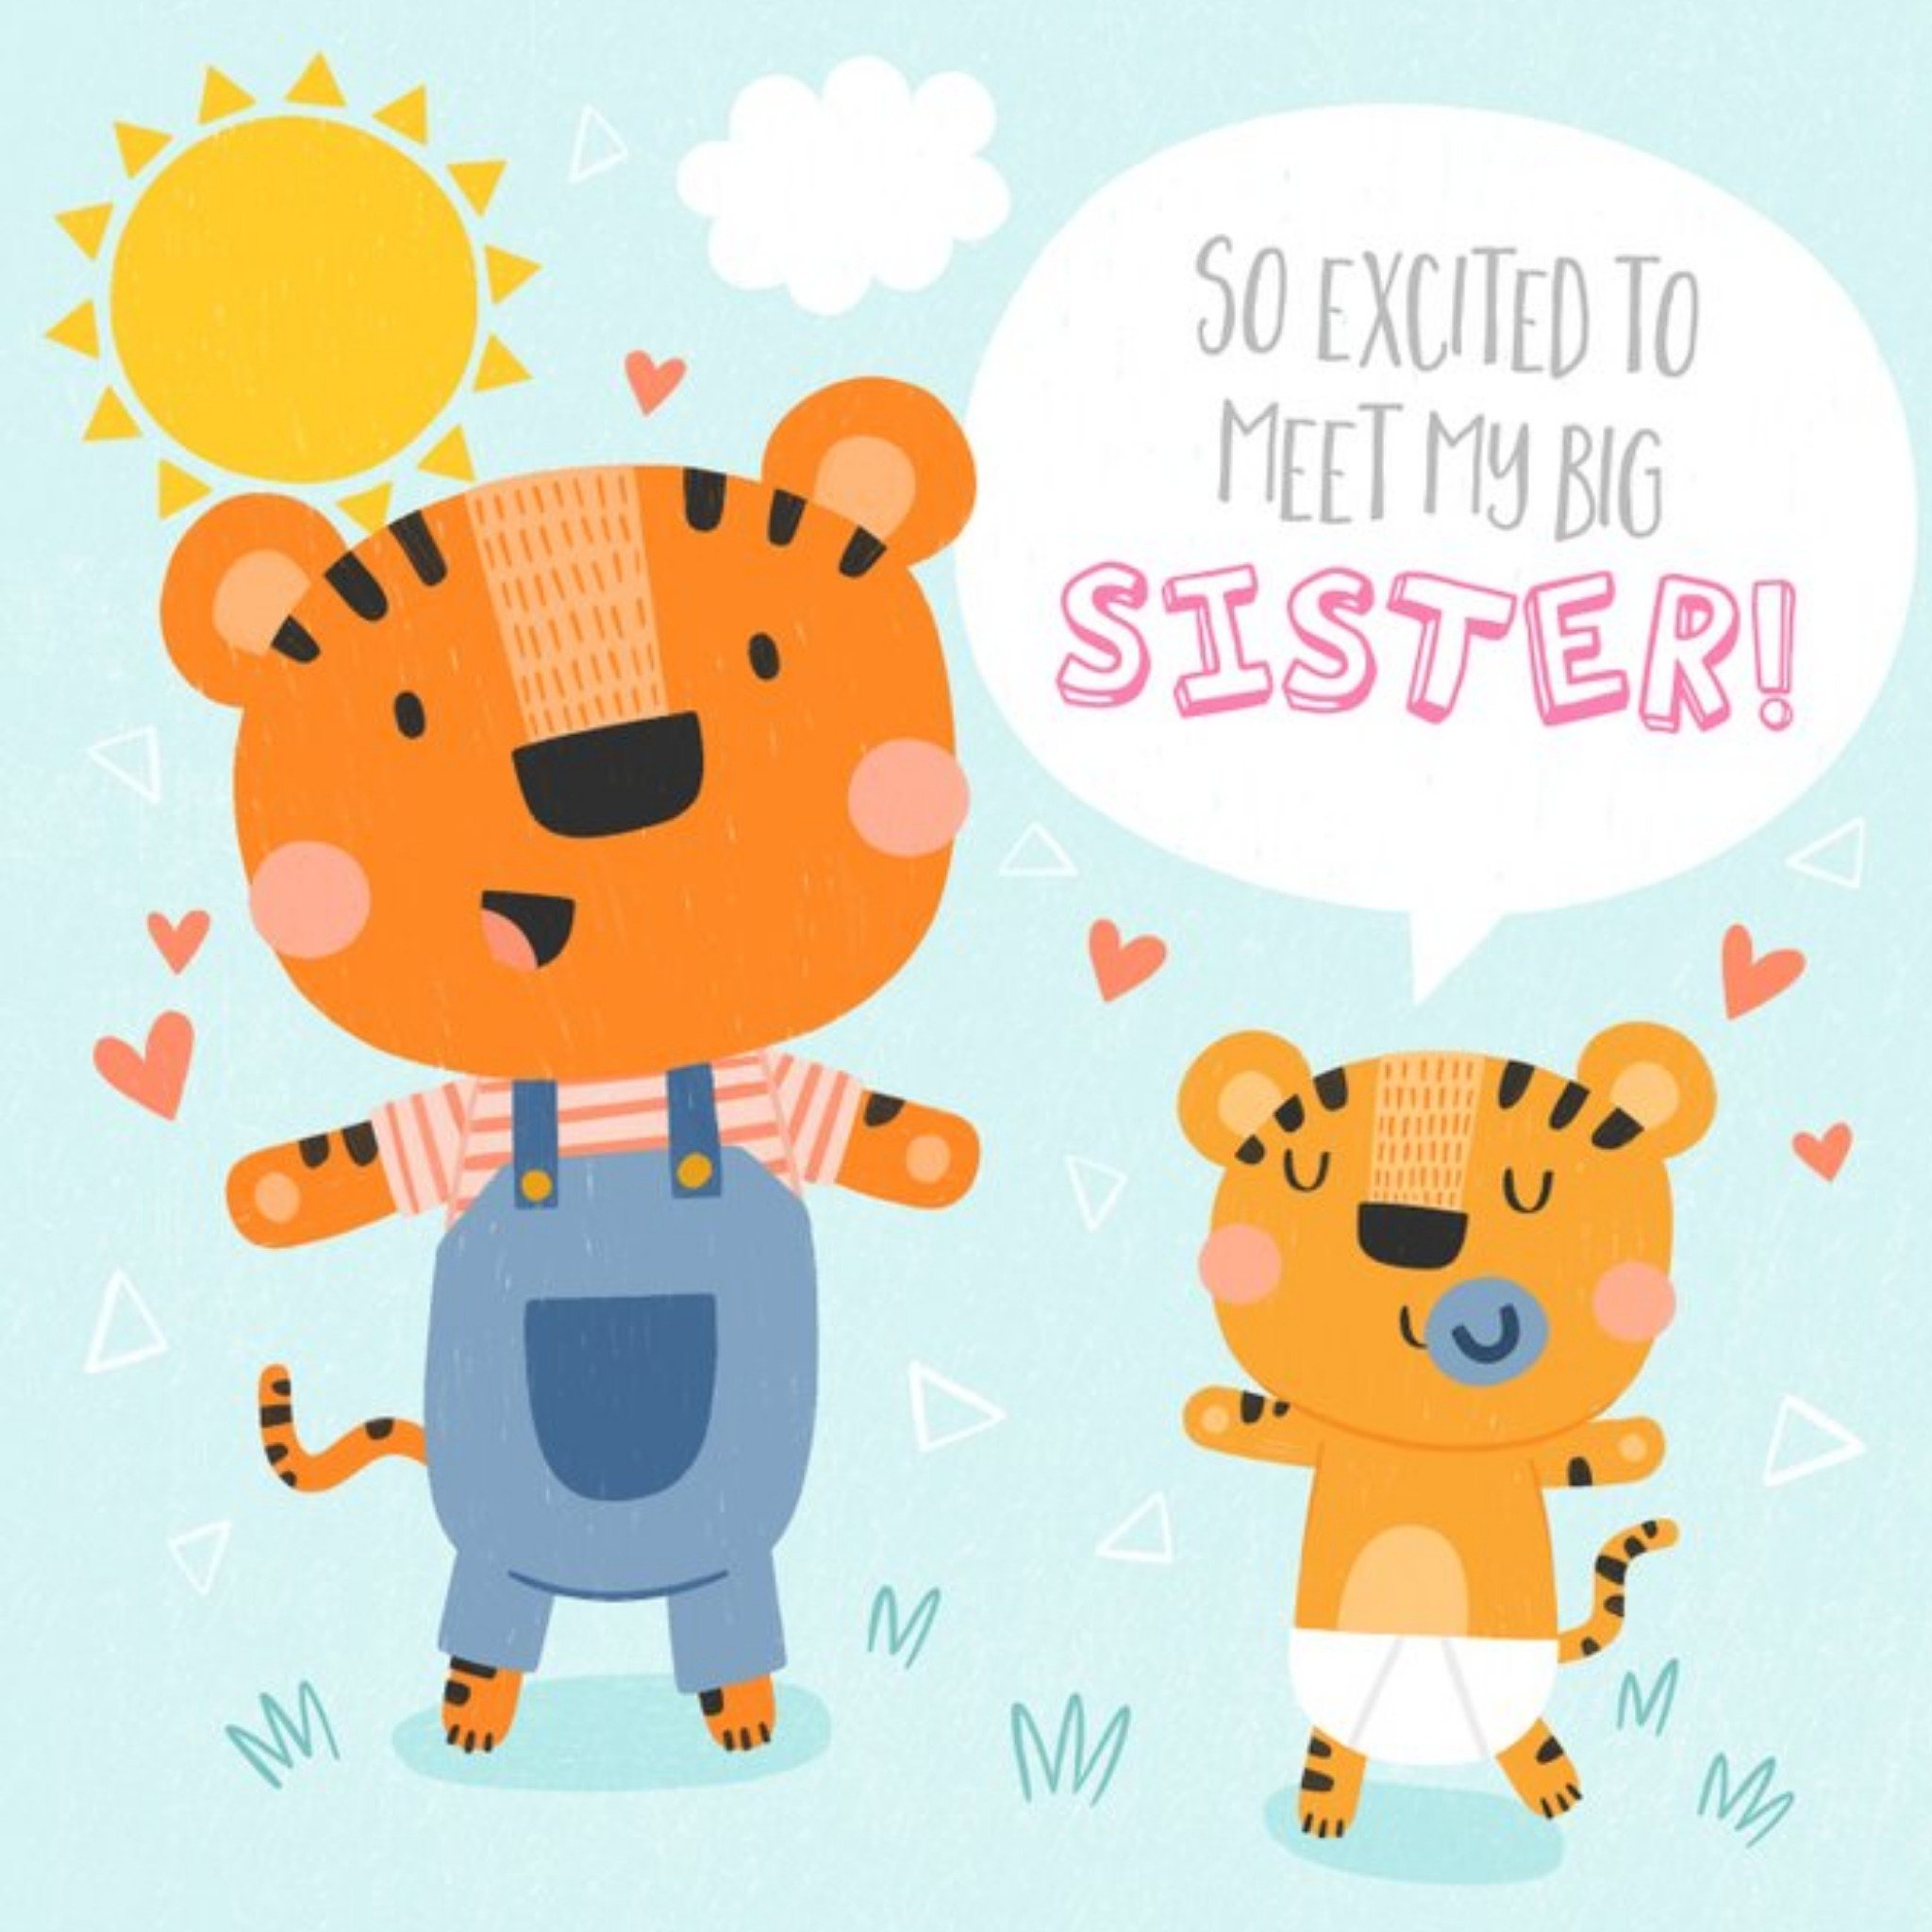 Moonpig Cute Illustrated Tiger Excited To Meet My Big Sister Card, Square